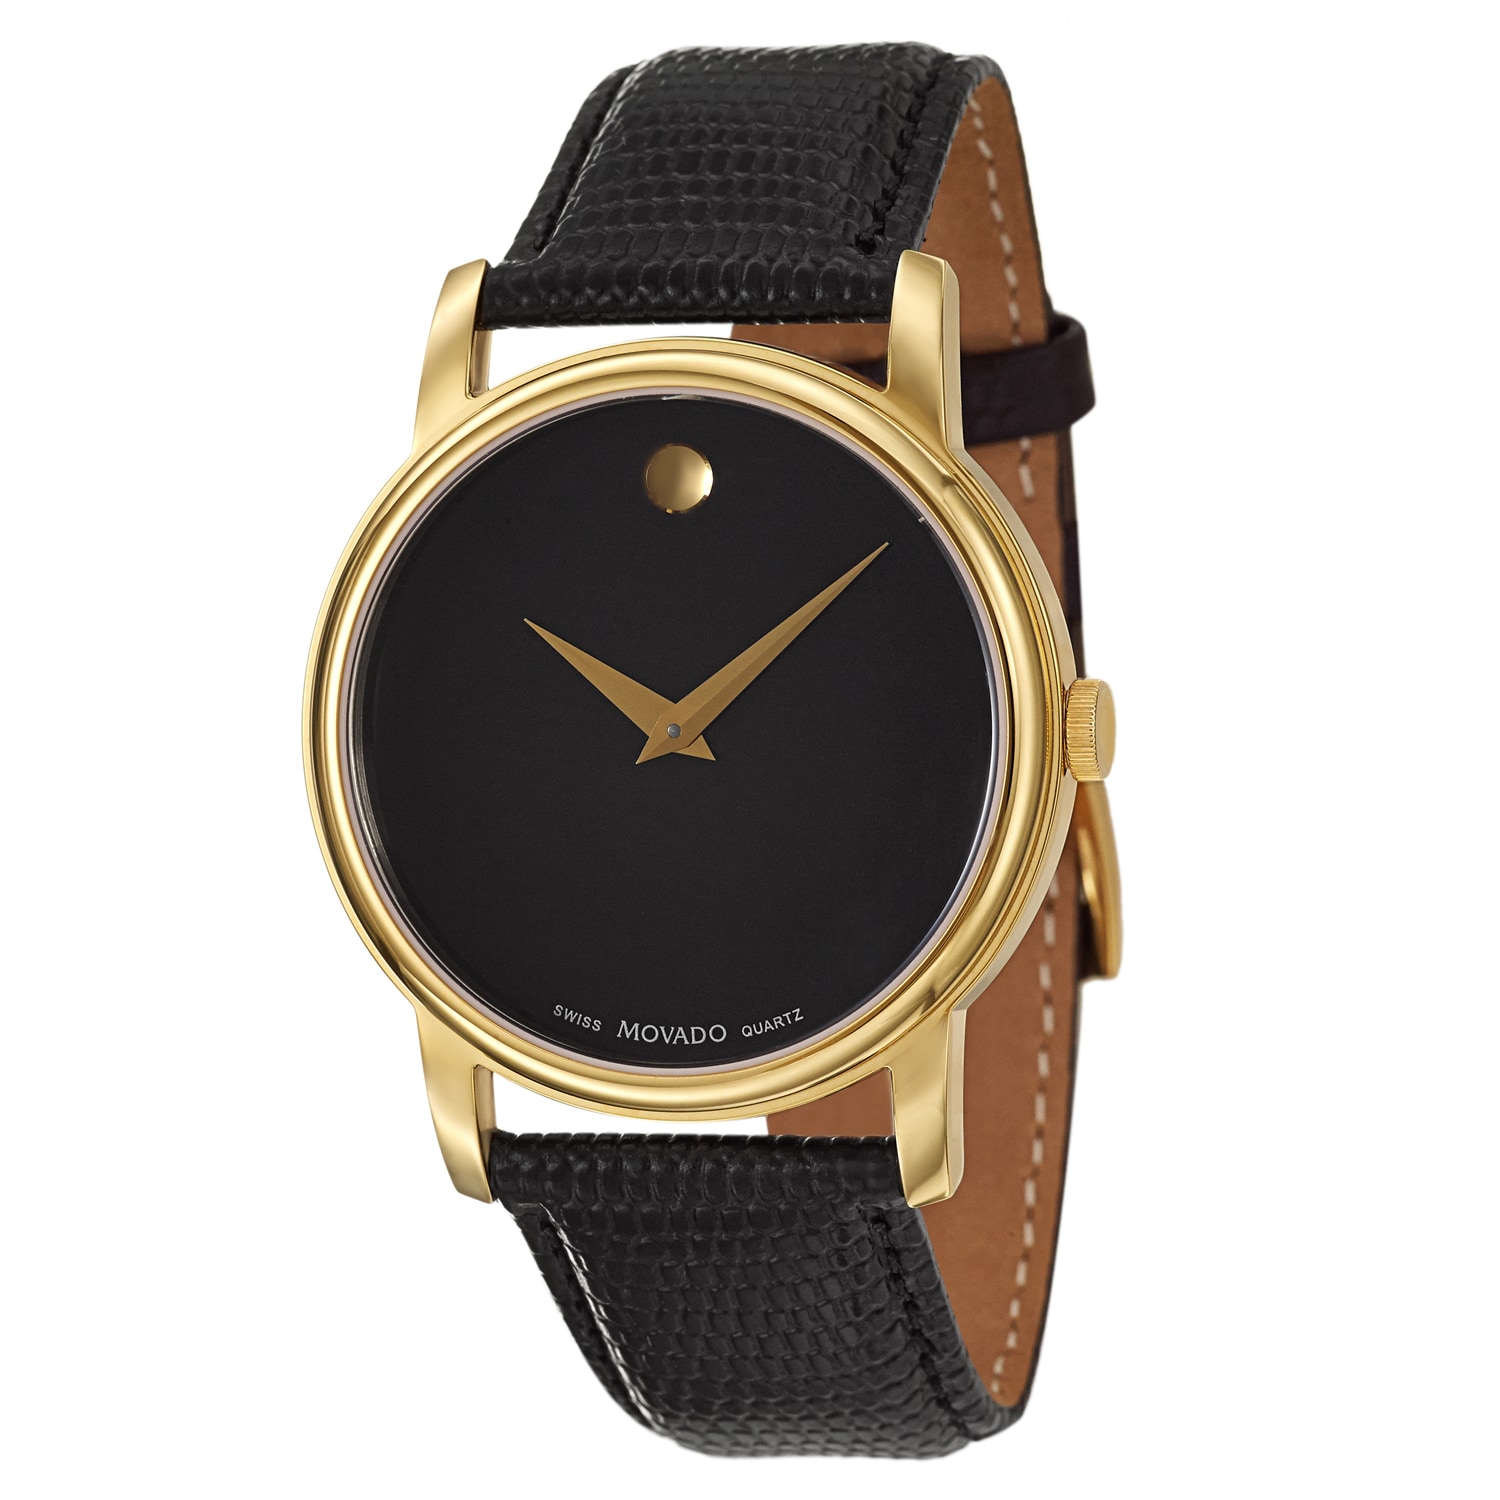 Shop Movado Men S Collection Yellow Goldplated Swiss Quartz